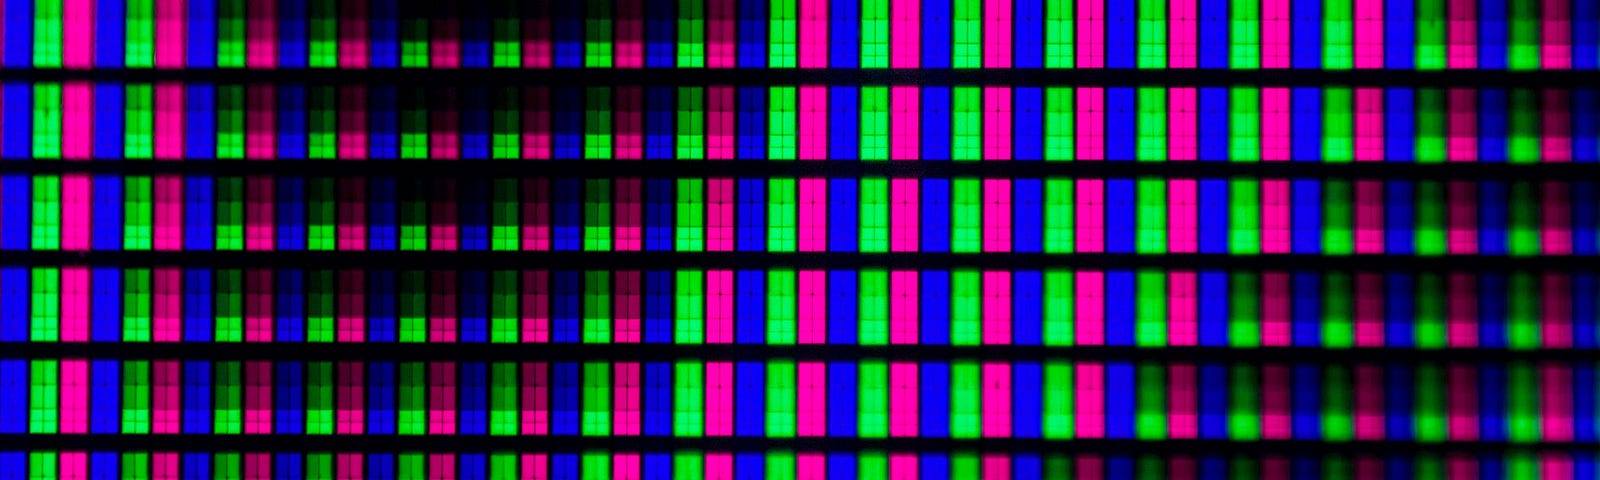 Pink, green, and blue rectangles repeating in rows